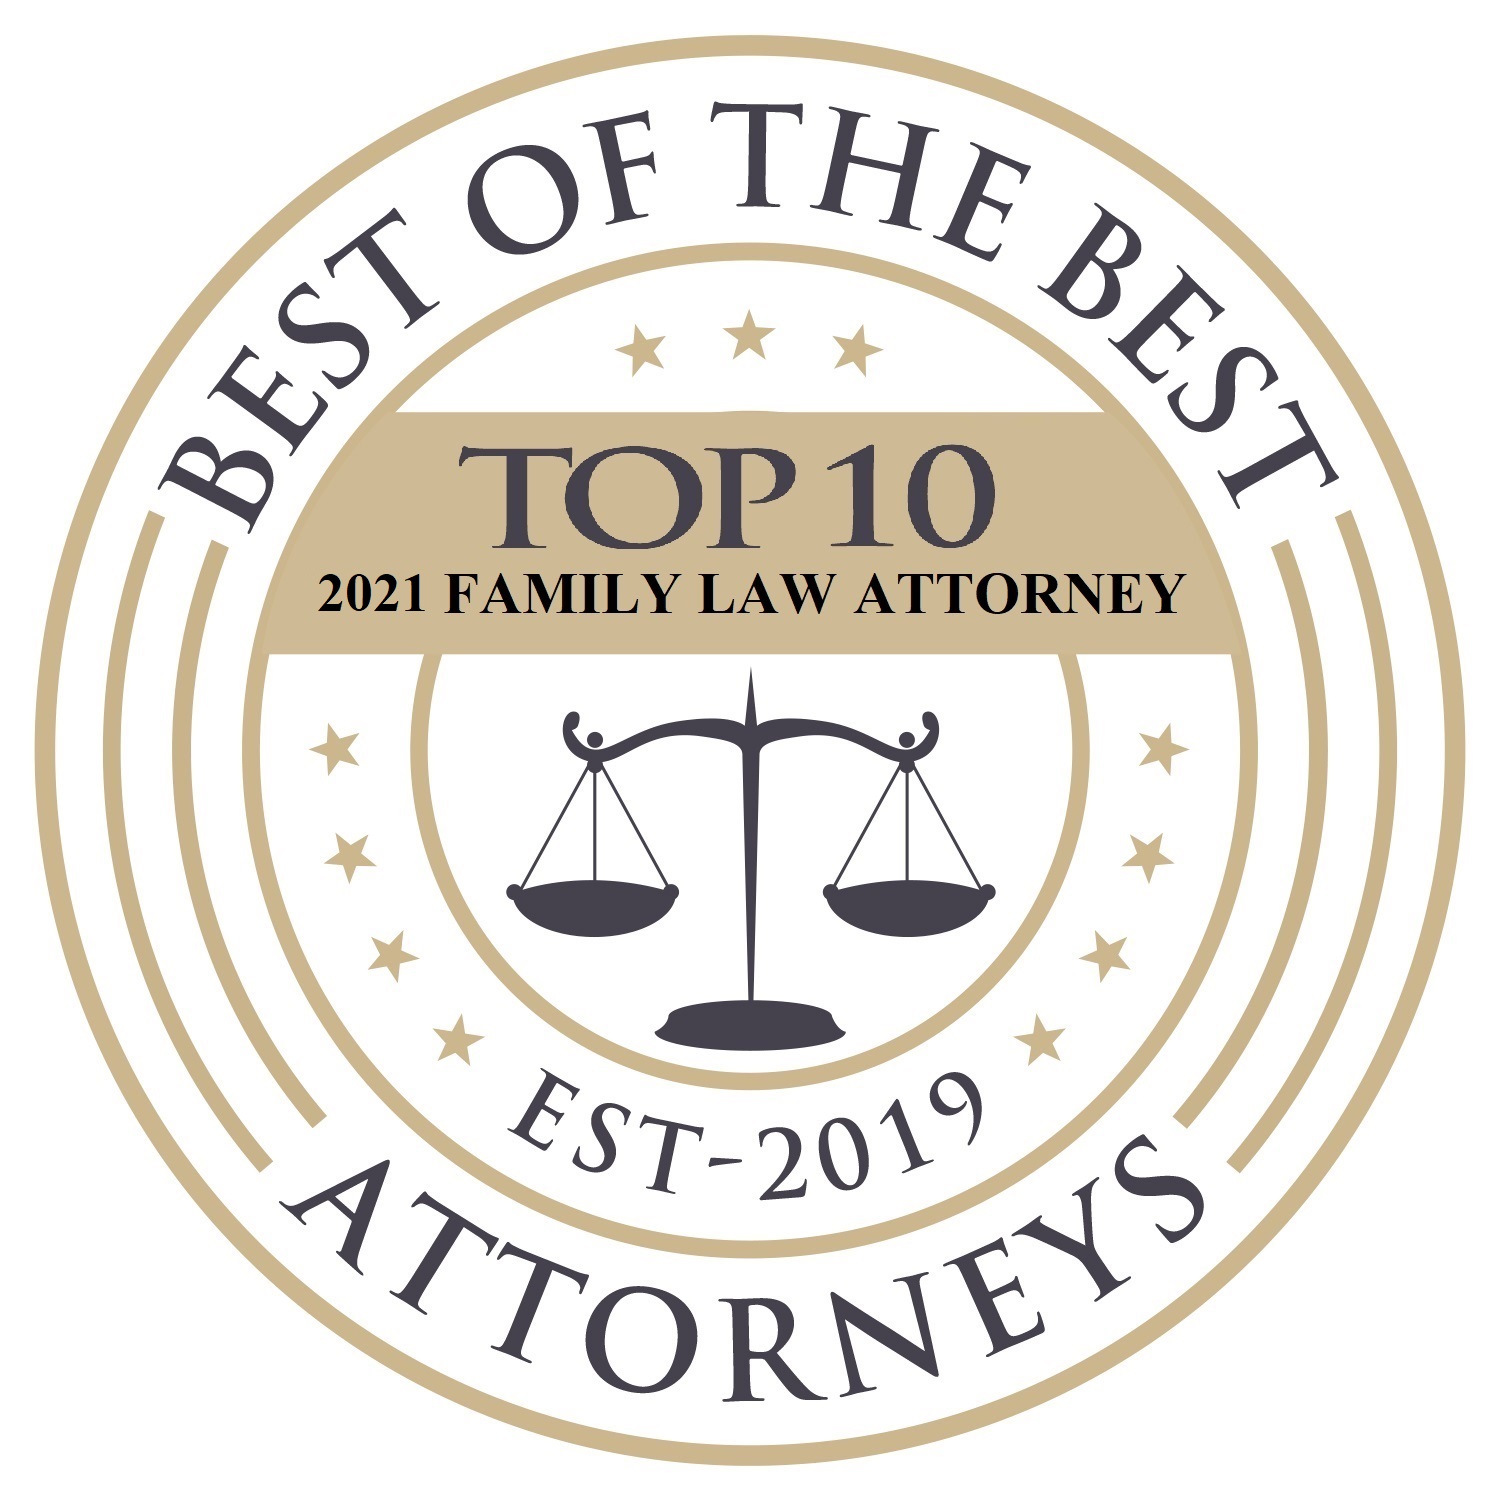 Best of the Best Top 10 Family Law Award